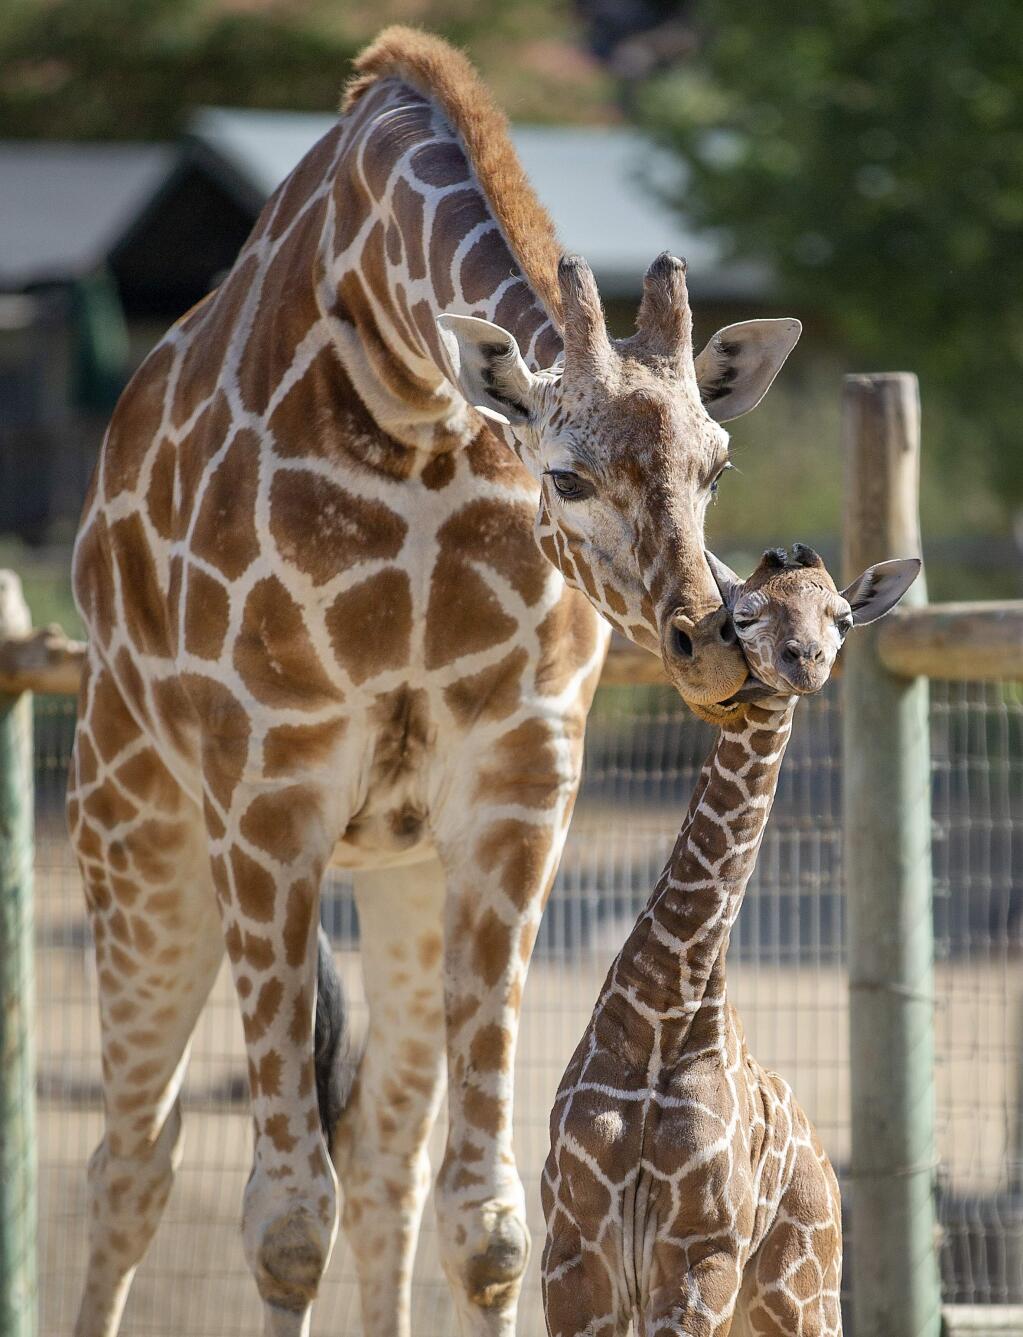 The 41st baby giraffe at Safari West in Santa Rosa came into the world on Tuesday, Aug. 27, 2019. (JOHN BURGESS/ PD)